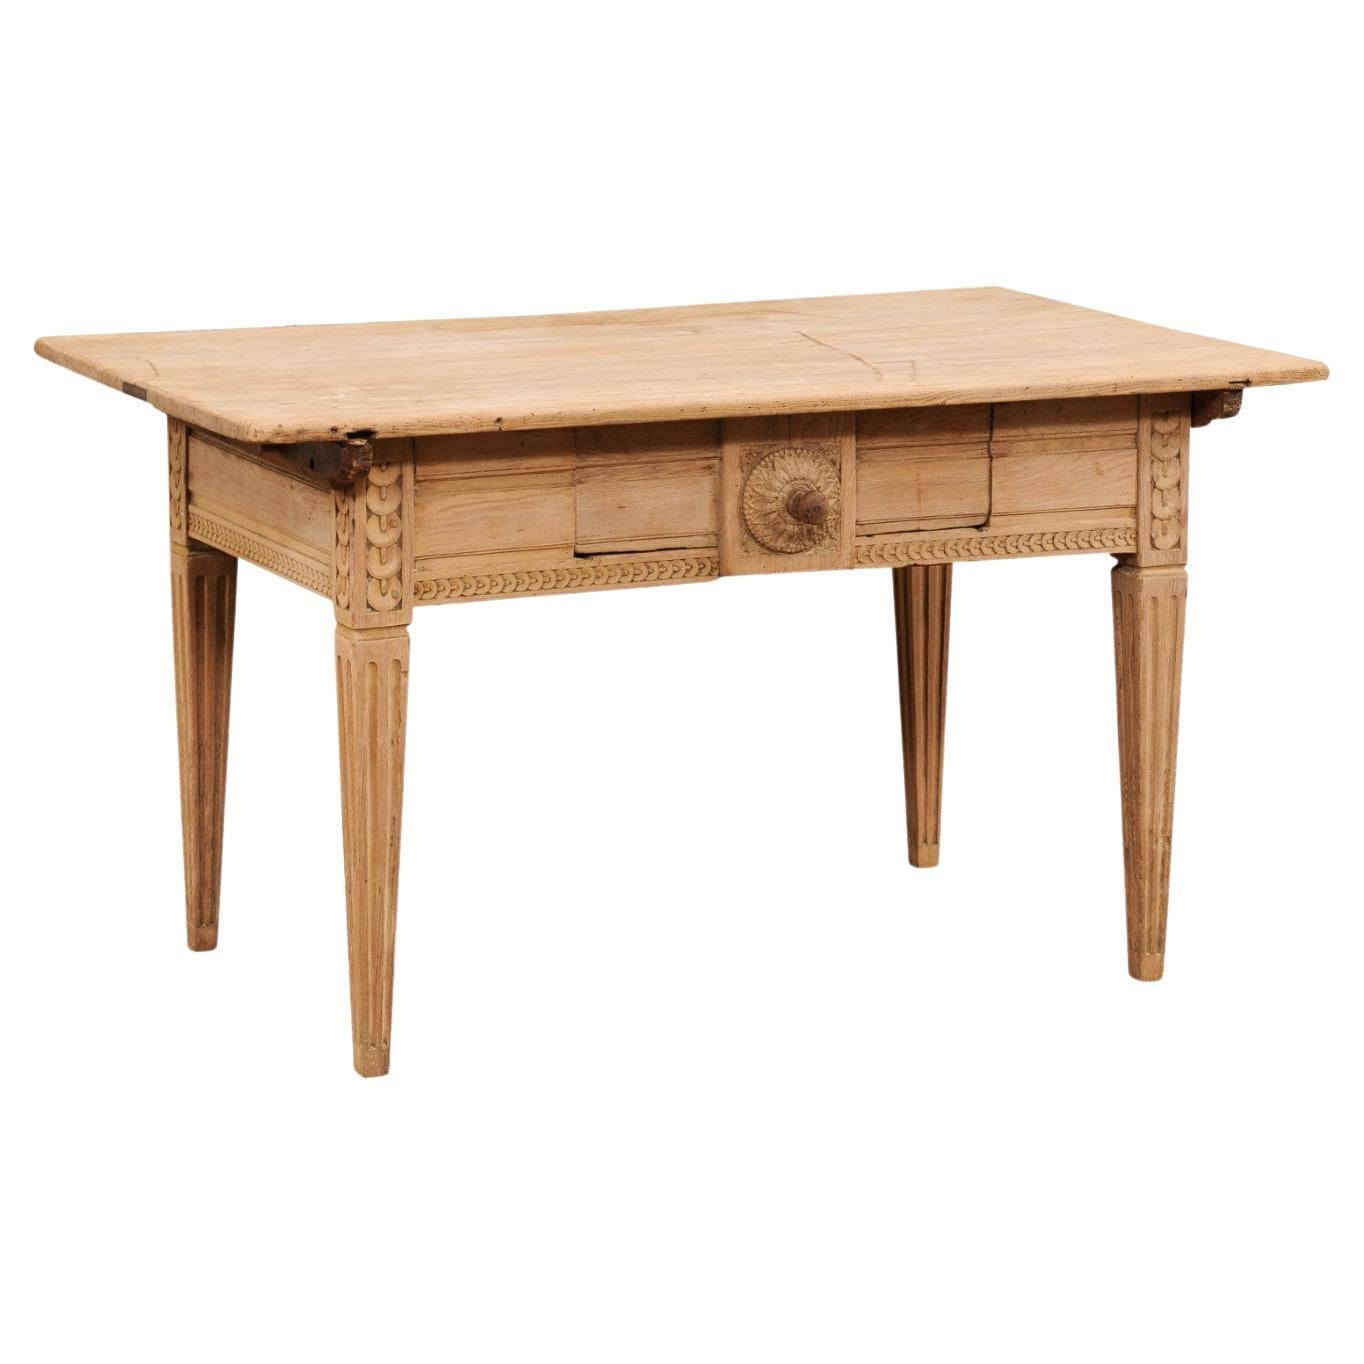 French, 1850s Napoléon III Period Center Table with Carved Motifs and Drawer For Sale